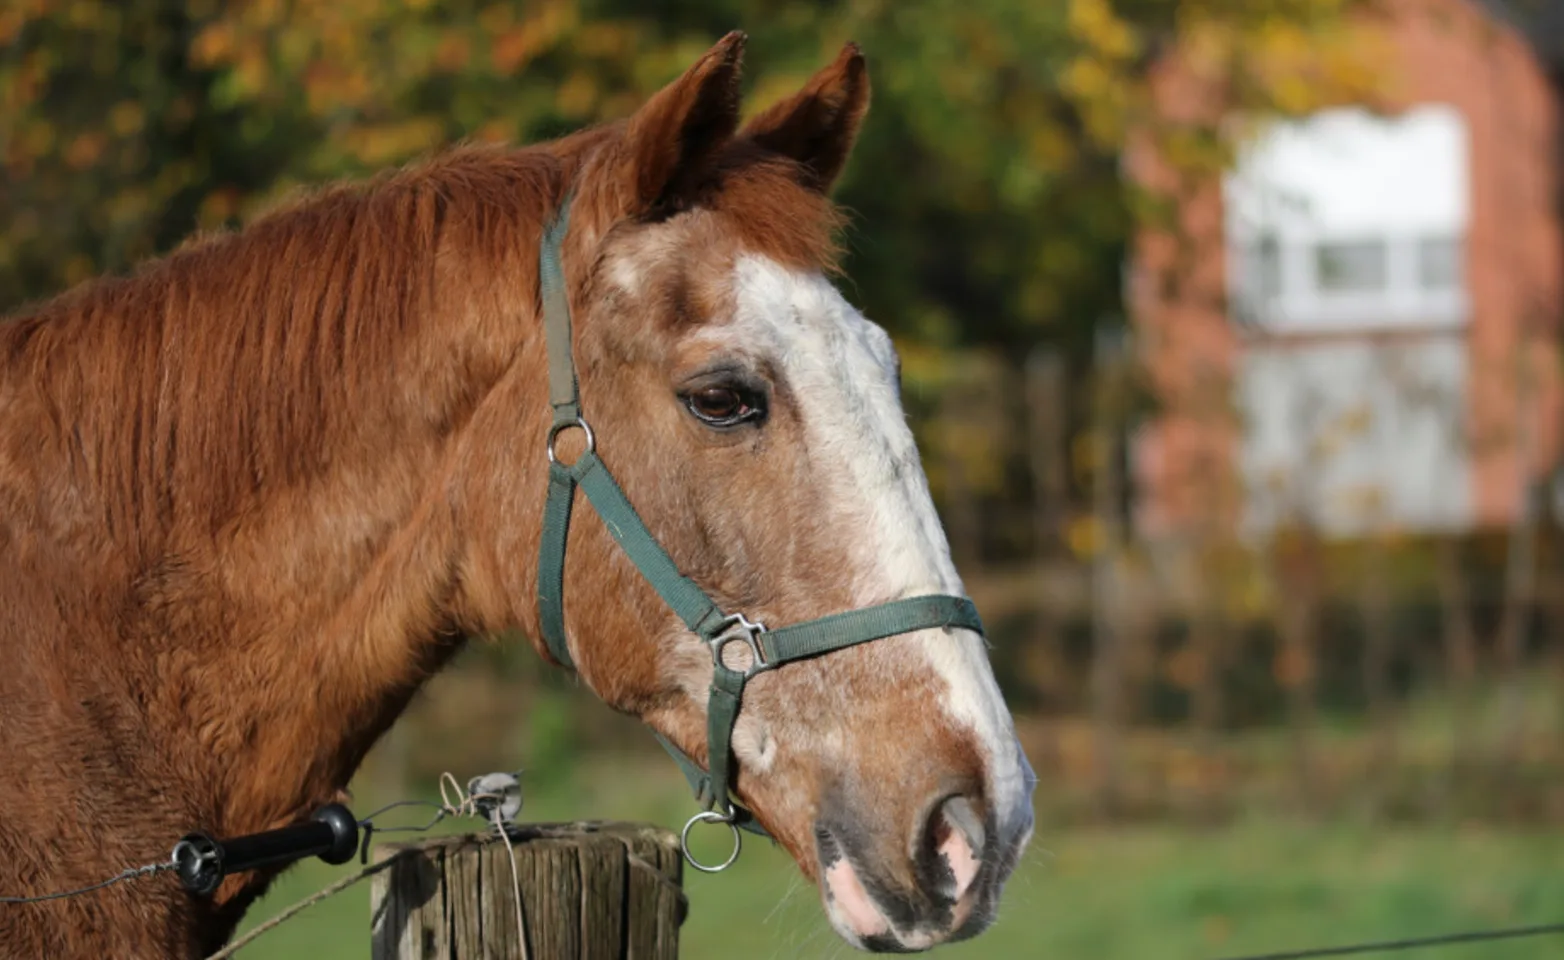 Senior horse in a pasture looking over a fence